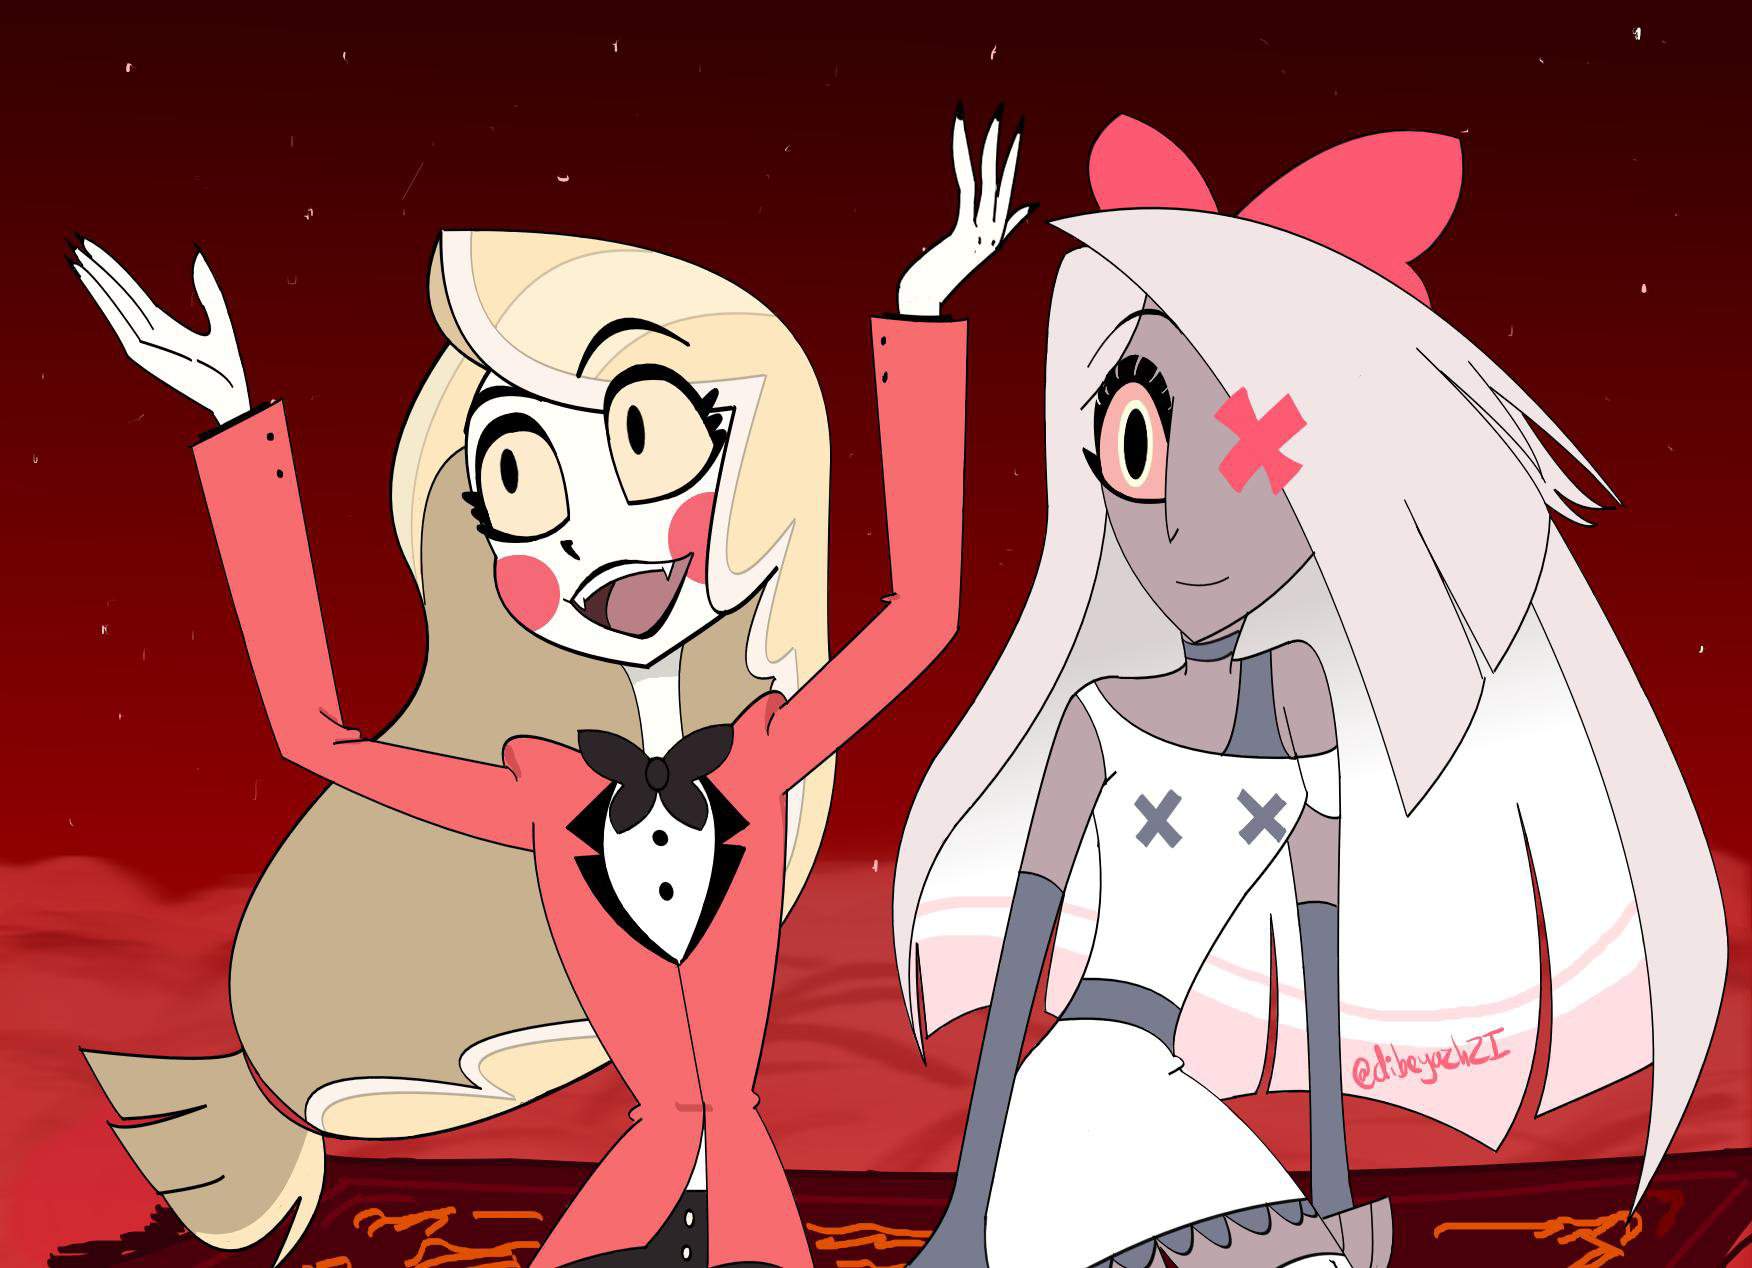 Charlie and Vaggie Hazbin Hotel (official) Amino.